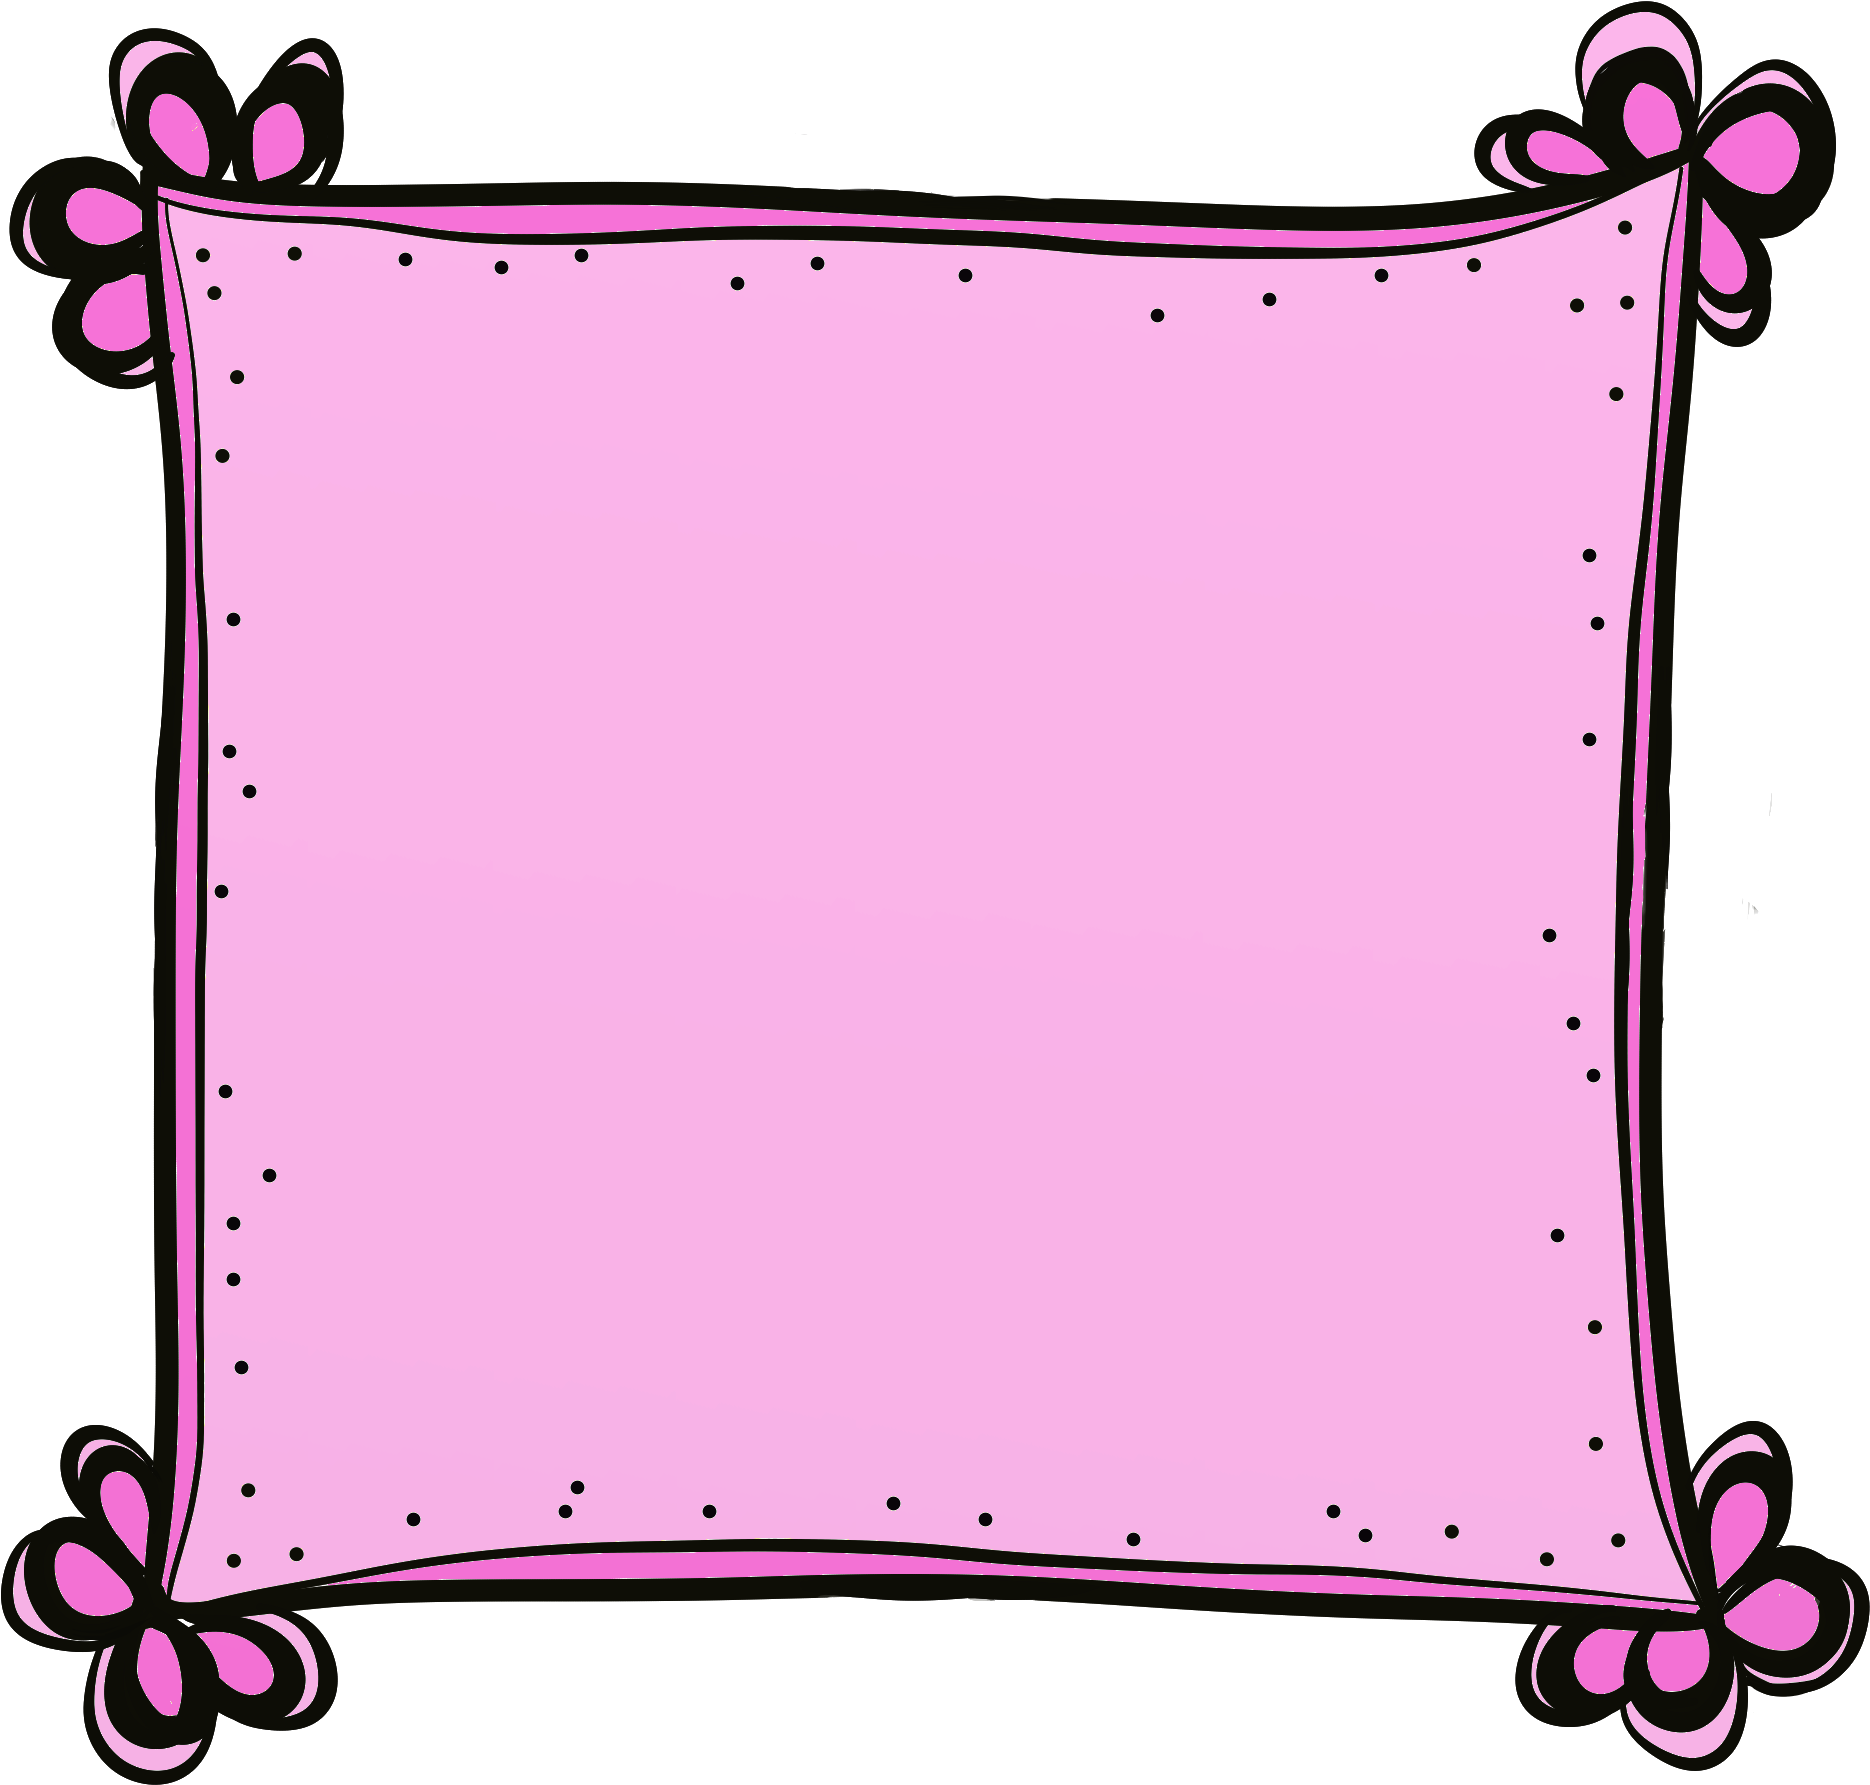 cute-frames-borders-and-frames-art-clipart-free-clip-art-library